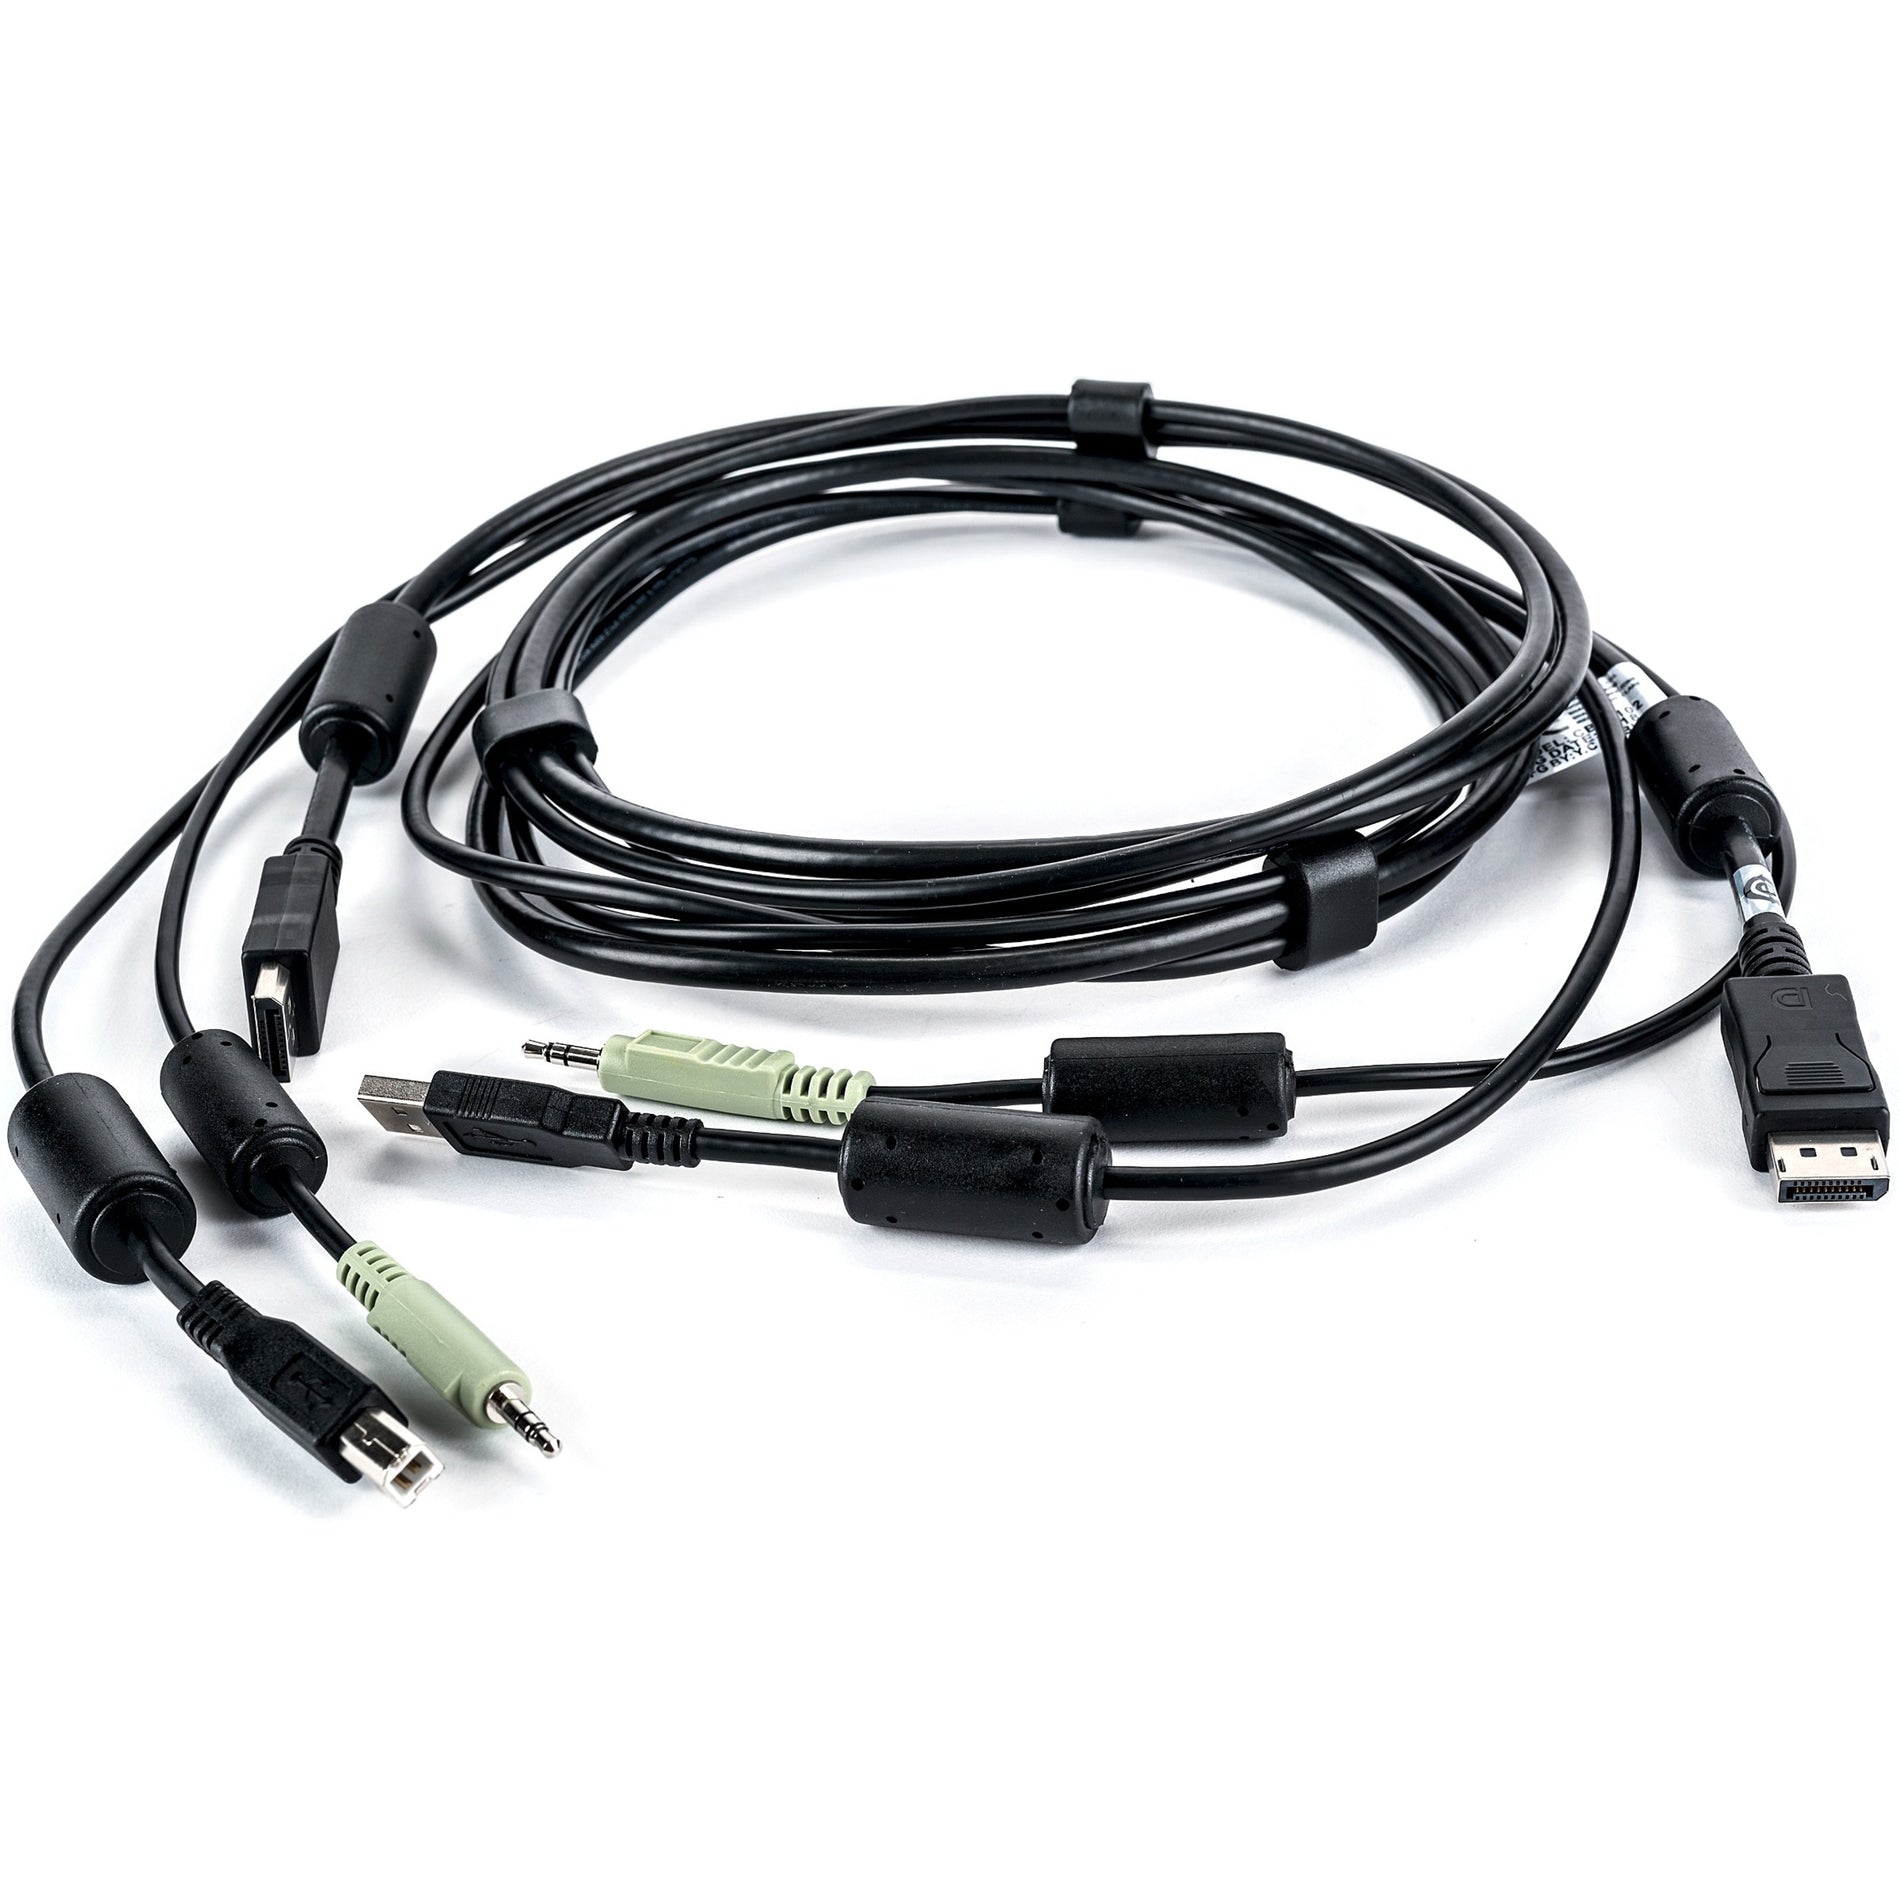 VERTIV CBL0102 SC840D Cable - 6ft, USB Keyboard and Mouse, DisplayPort and Audio Cable